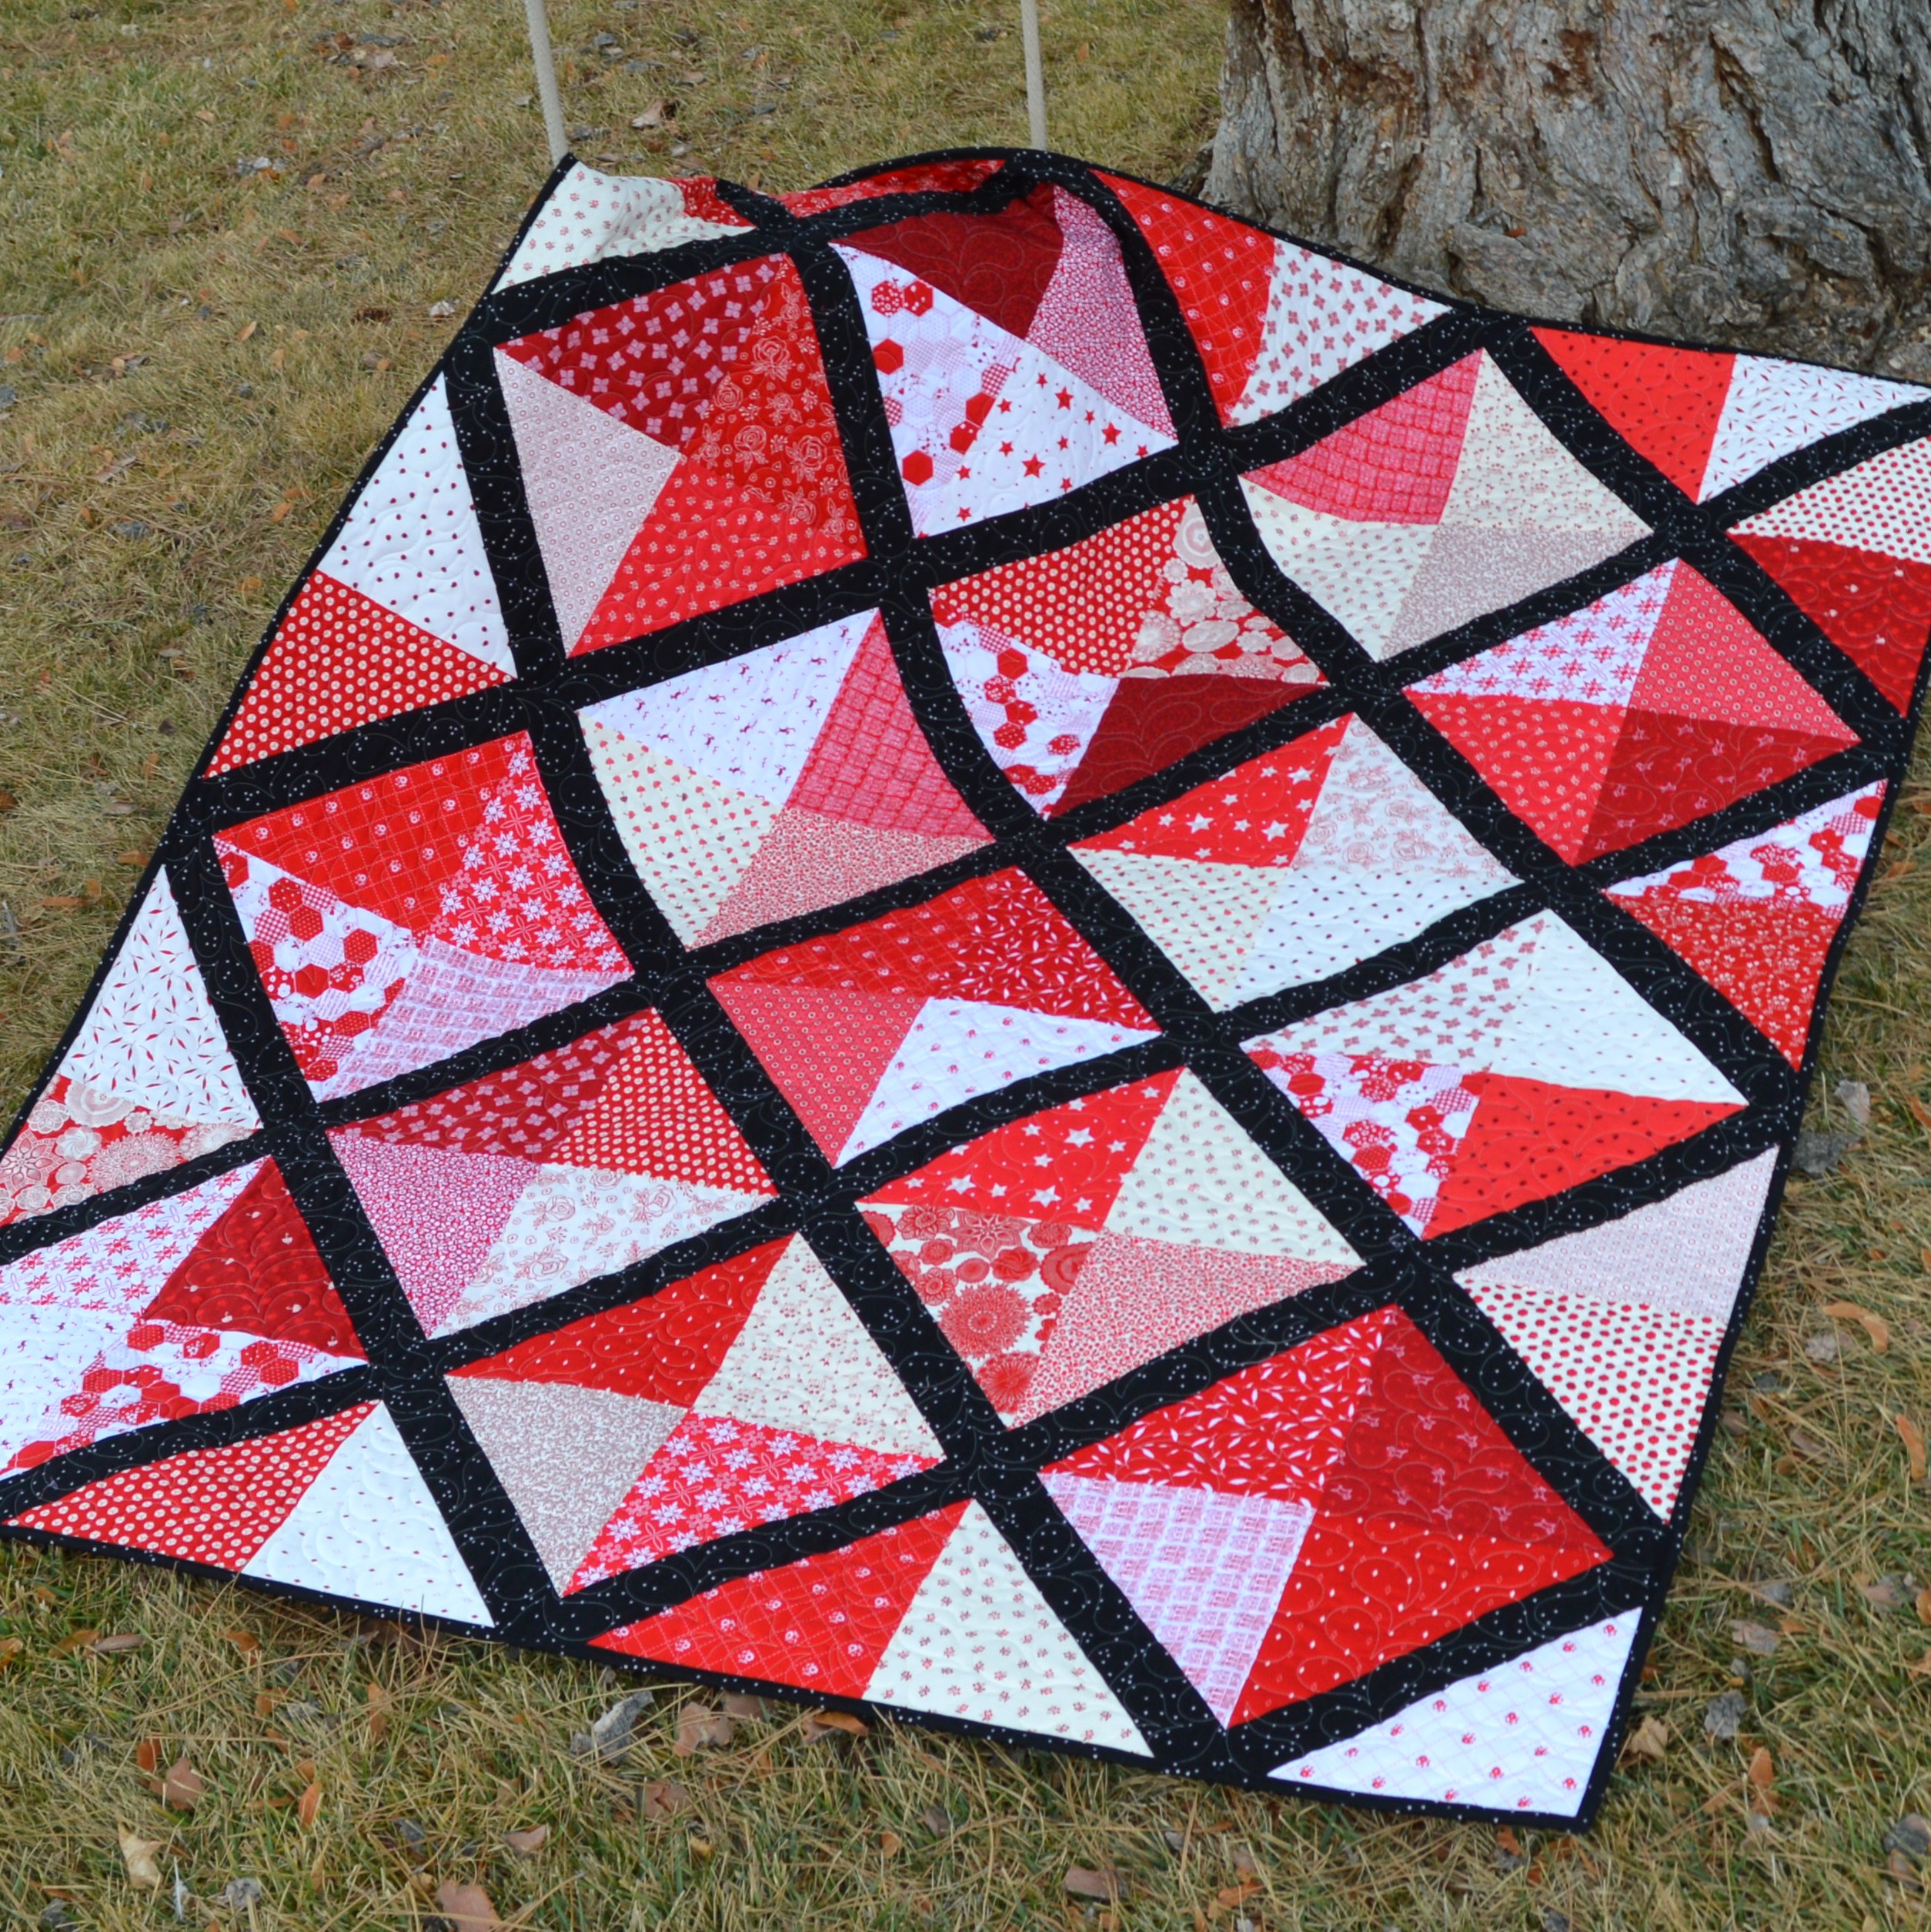 10 EASY Quilt Blocks to Make Your Next Quilted Masterpiece